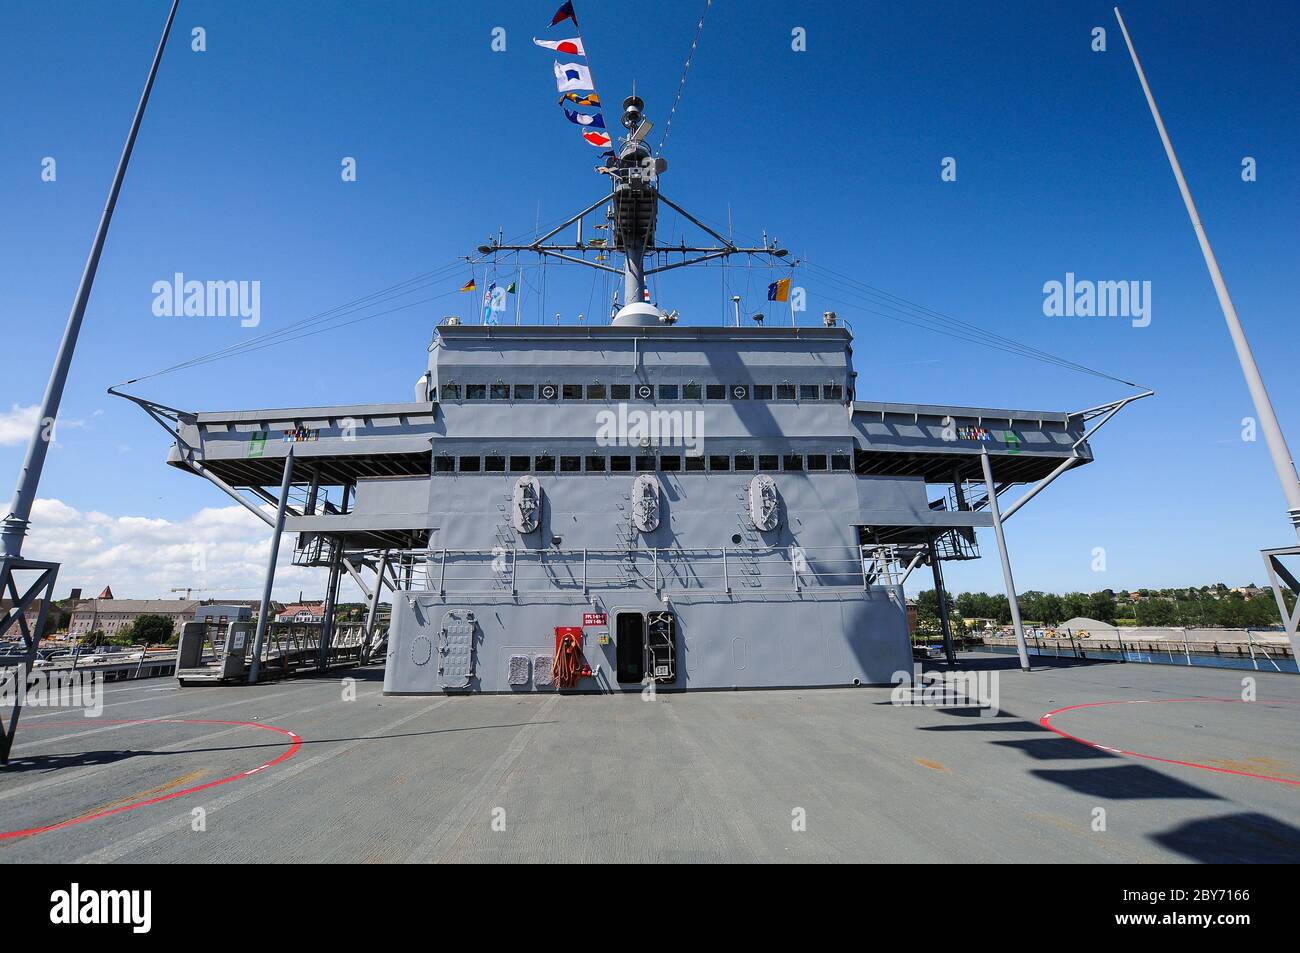 June 22, 2019, the USS Mount Whitney (LCC-20), a command ship for the United States Navy's amphibious warfare and the second Blue Ridge class ship. It is named after Mount Whitney and has served in the U.S. Navy since 1971, and has been part of the Military Sealift Command since 2004. It is based in Gaeta, Italy and serves as the flagship for the commander of the 6th U.S. fleet. The ship deck on a sightseeing tour. The ship was in Kiel during the NATO maneuver BALTOPS. | usage worldwide Stock Photo